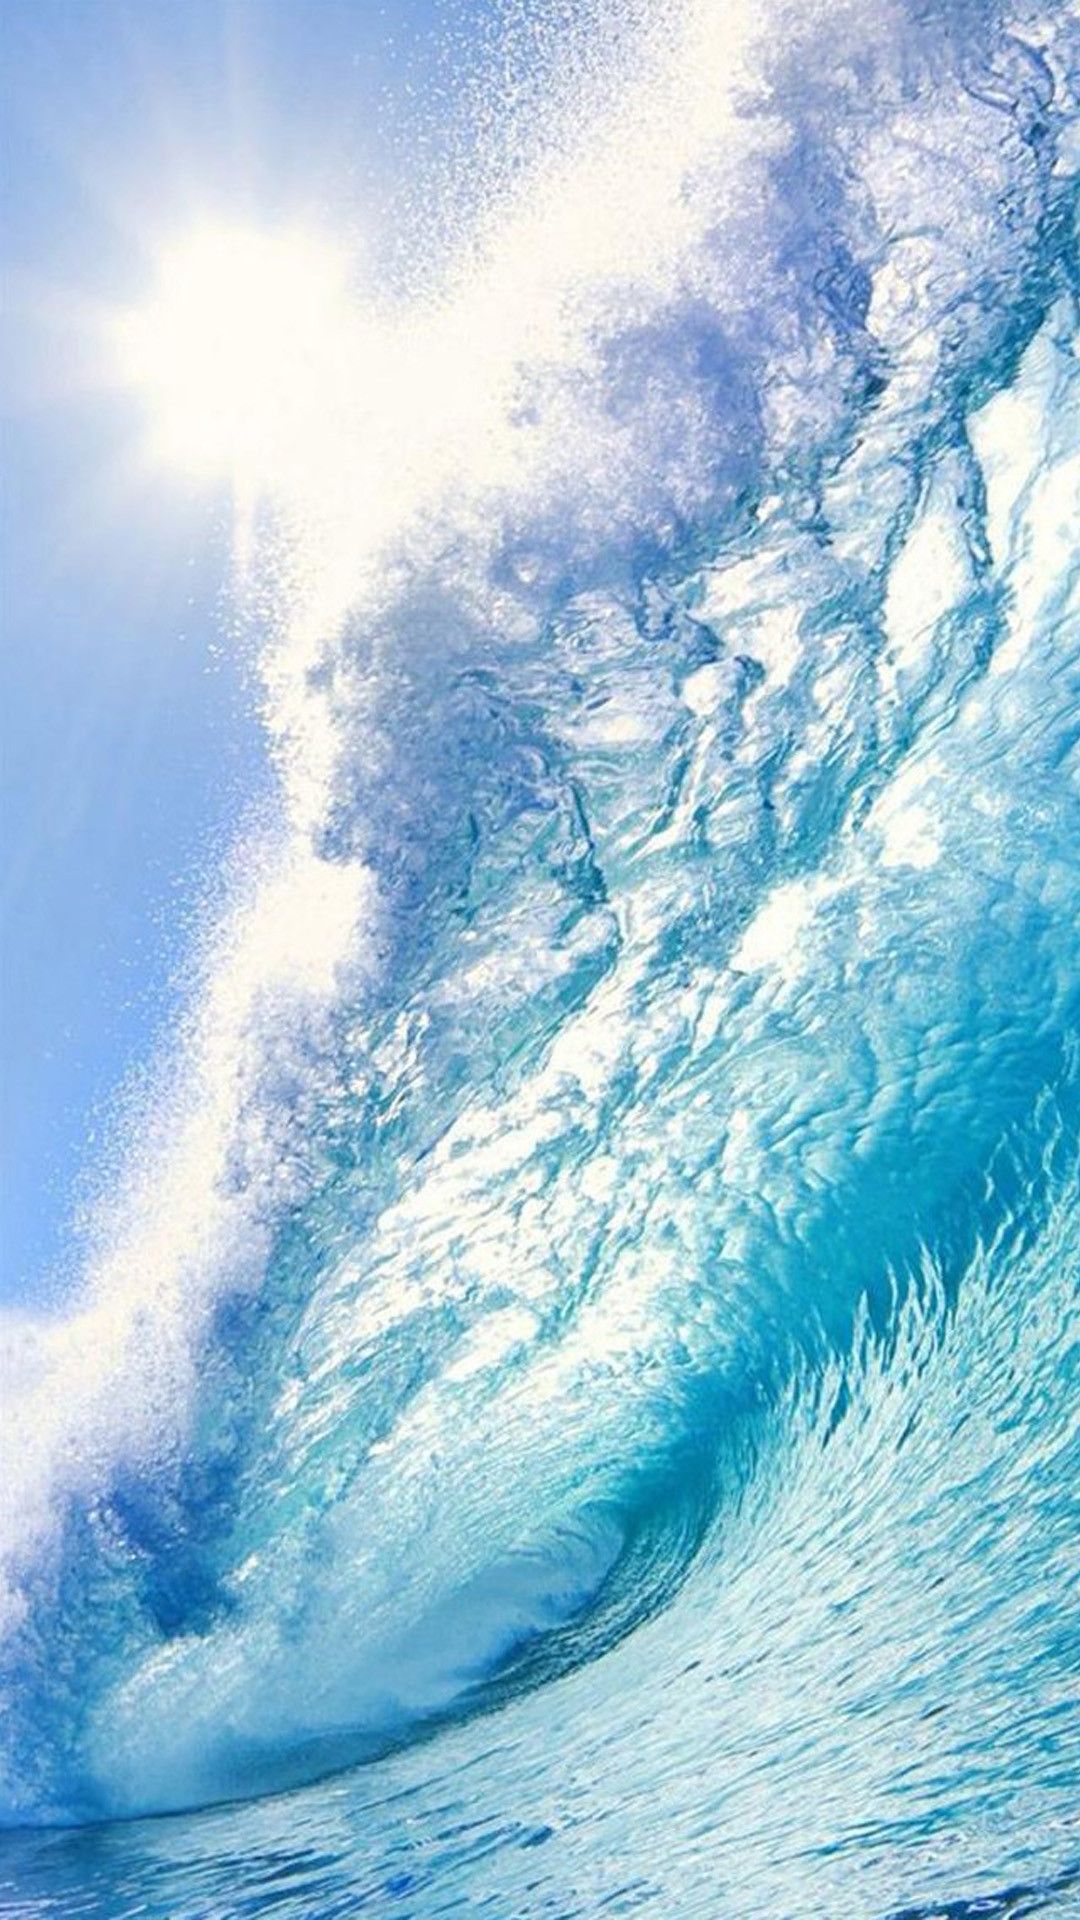 Surfing Wallpaper for iPhone